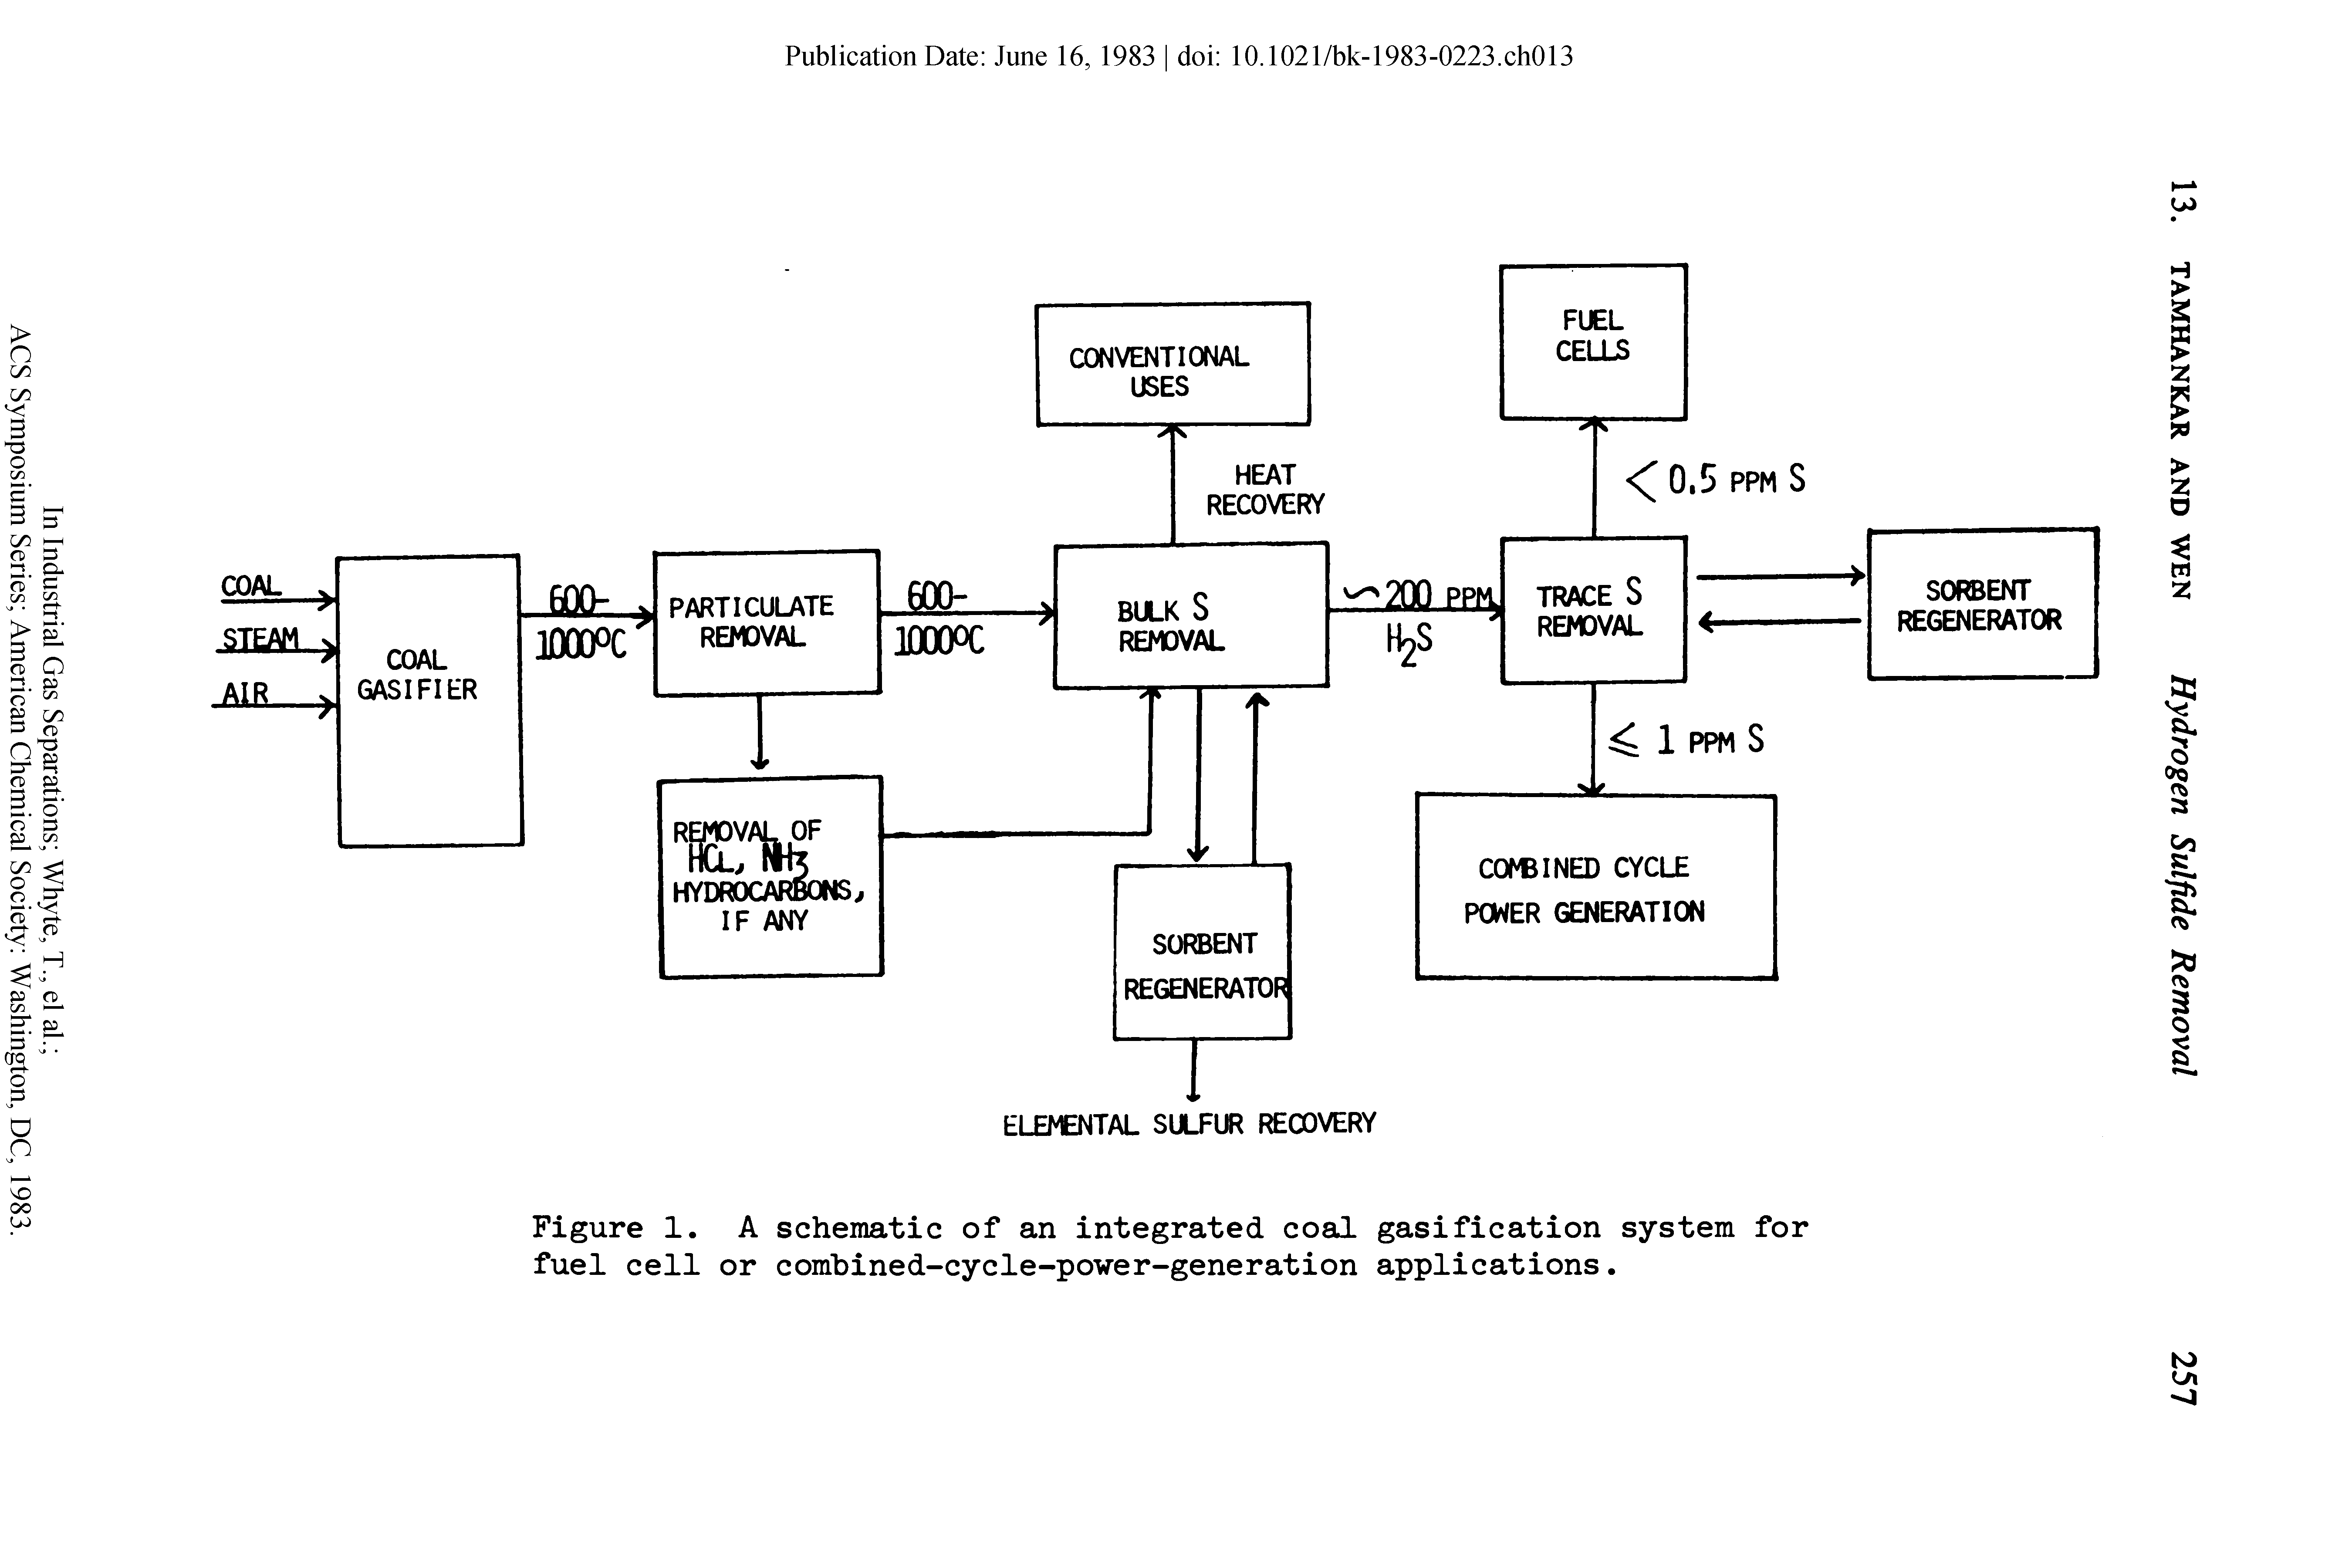 Figure 1. A schematic of an integrated coal gasification system for fuel cell or combined-cycle-power-generation applications.